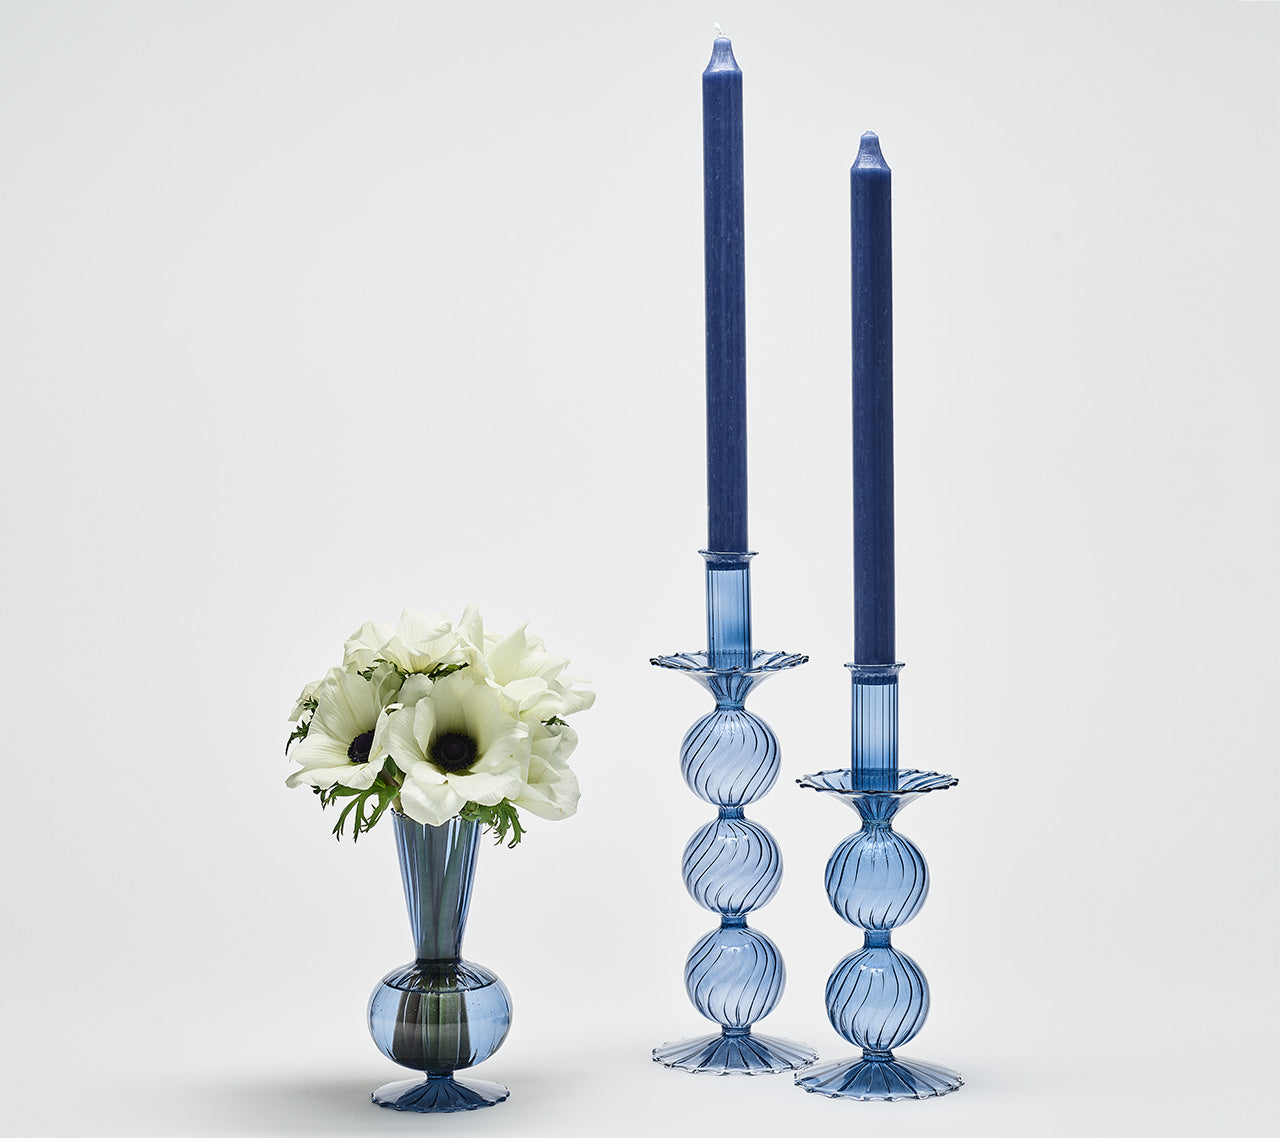 Two Iris Tall Candle Holder in cadet blue next to a blue vase with white flowers